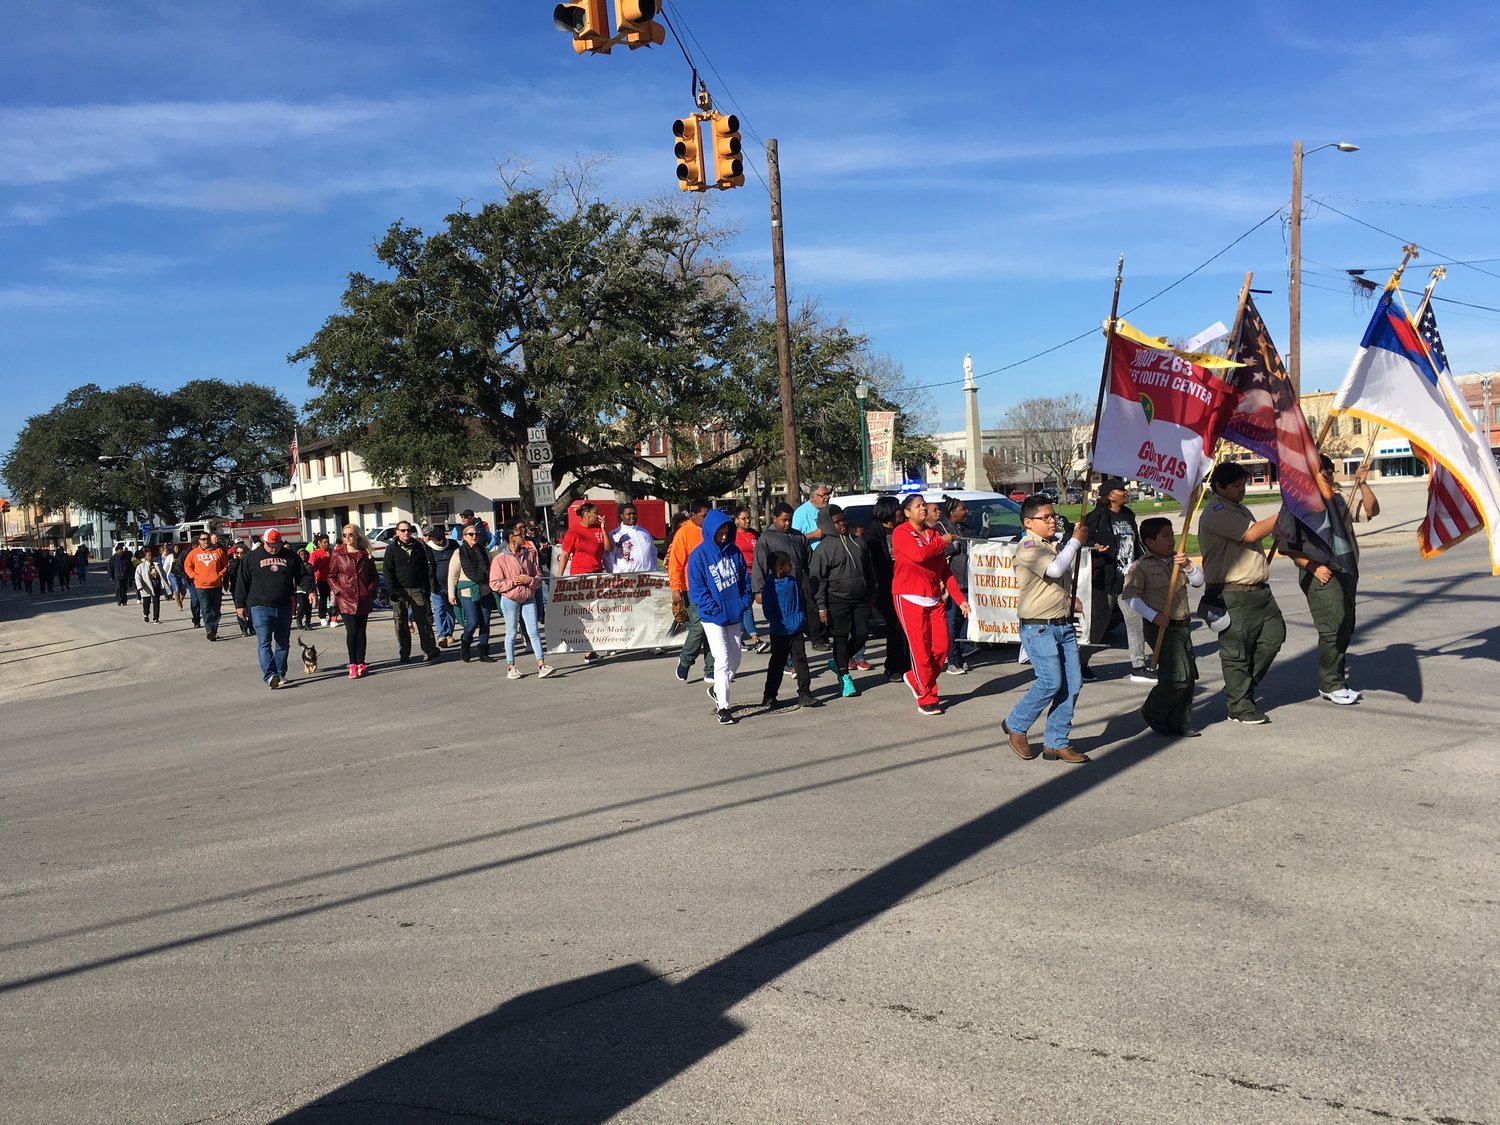 A large crowd assembled Monday morning and marched through Gonzales streets in remembrance of MLK. Songs were led by those at the head of the group, and “We Shall Overcome” reminded those that racial divisions still exist in the ongoing struggle for equal rights and opportunities in Gonzales, Texas, and America.